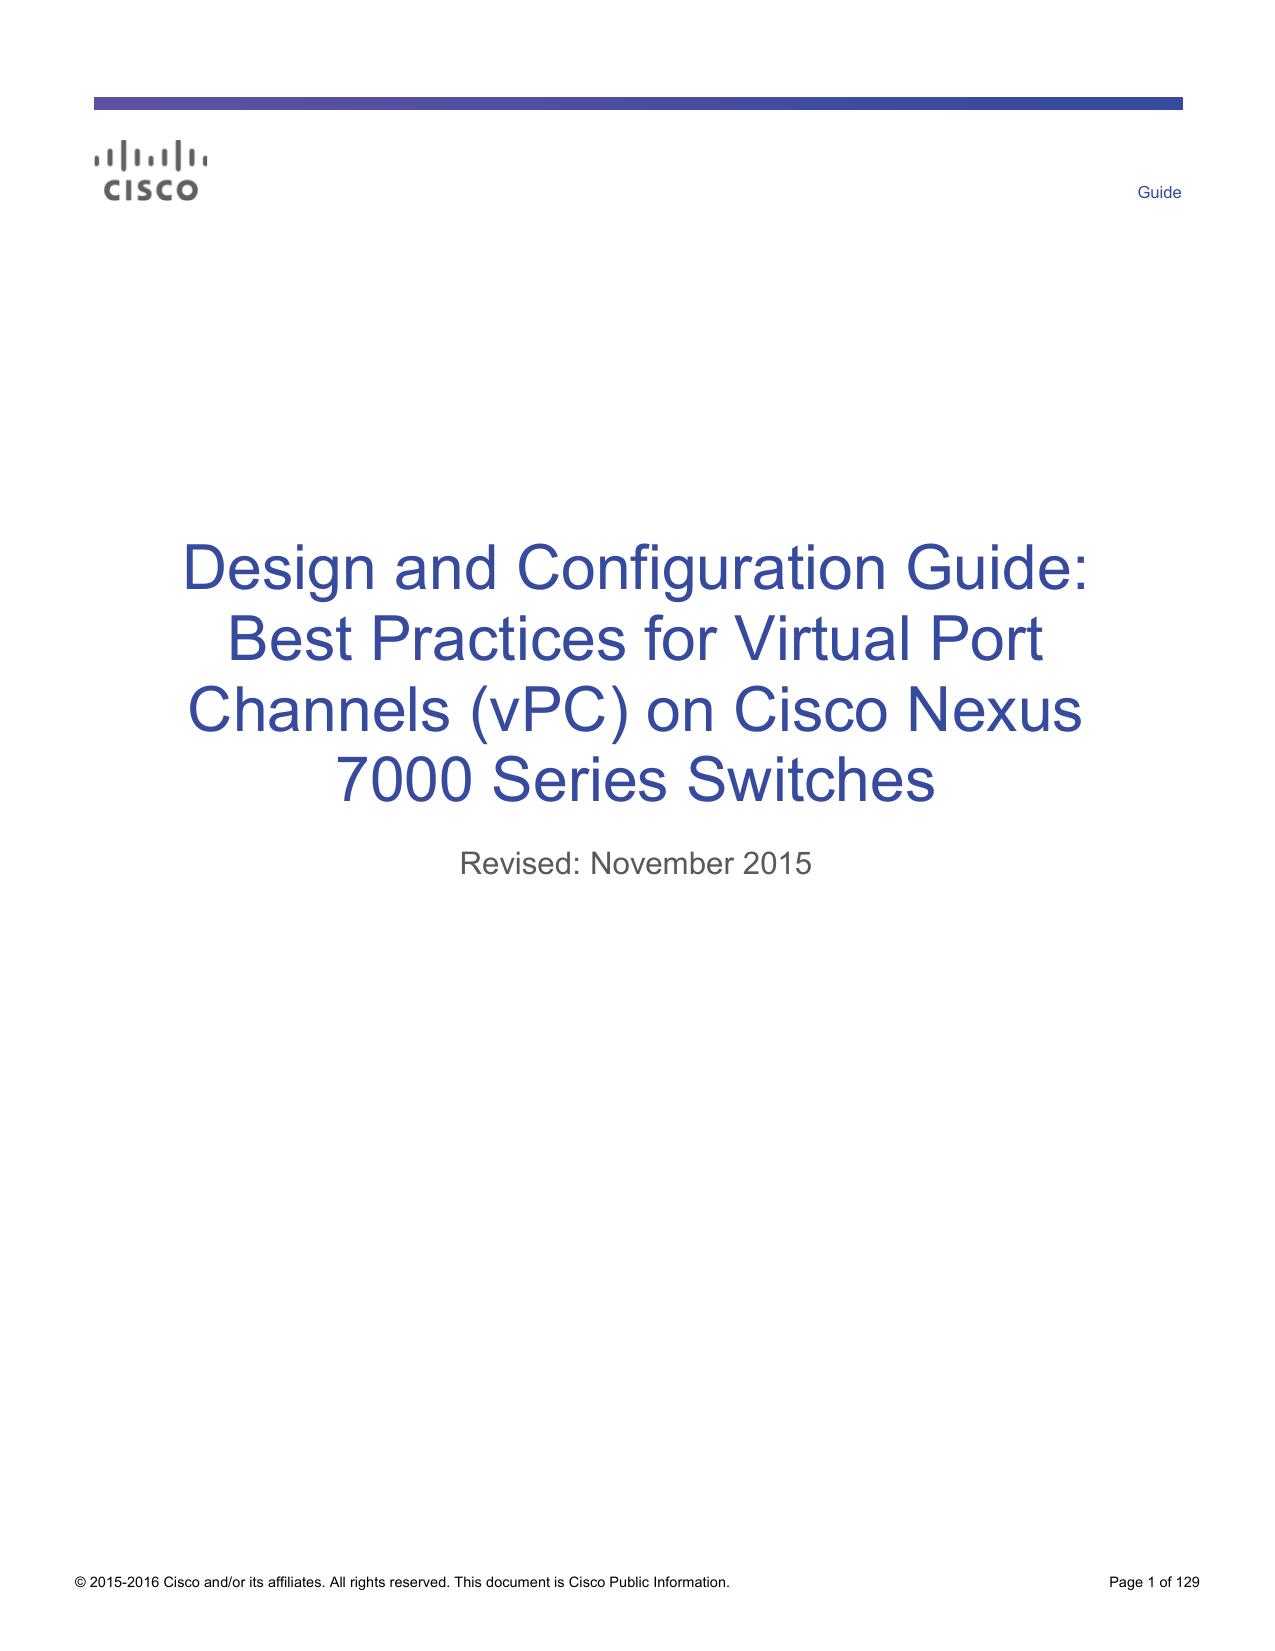 Design and Configuration Guide: Best Practices for Virtual Port Channels (vPC) on Cisco Nexus 7000 Series Switches